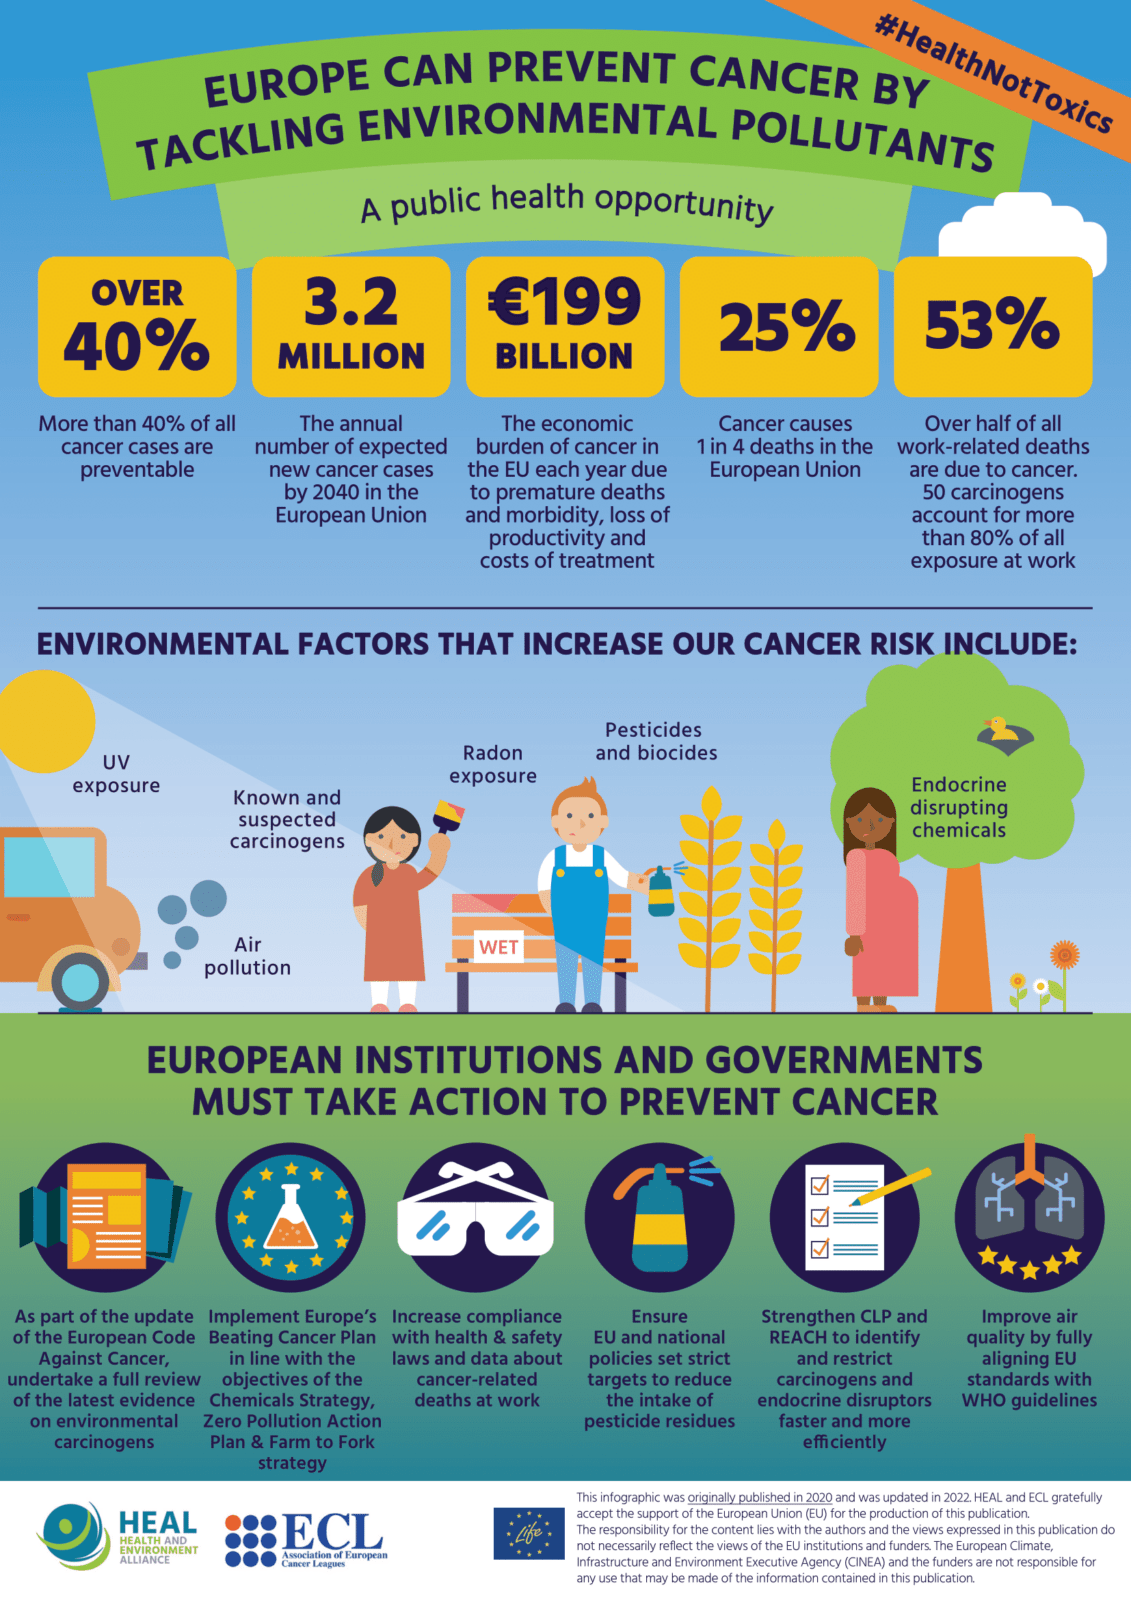 HEAL and European Cancer Leagues relaunch infographic illustrating how Europe can prevent cancer by tackling environmental pollutants